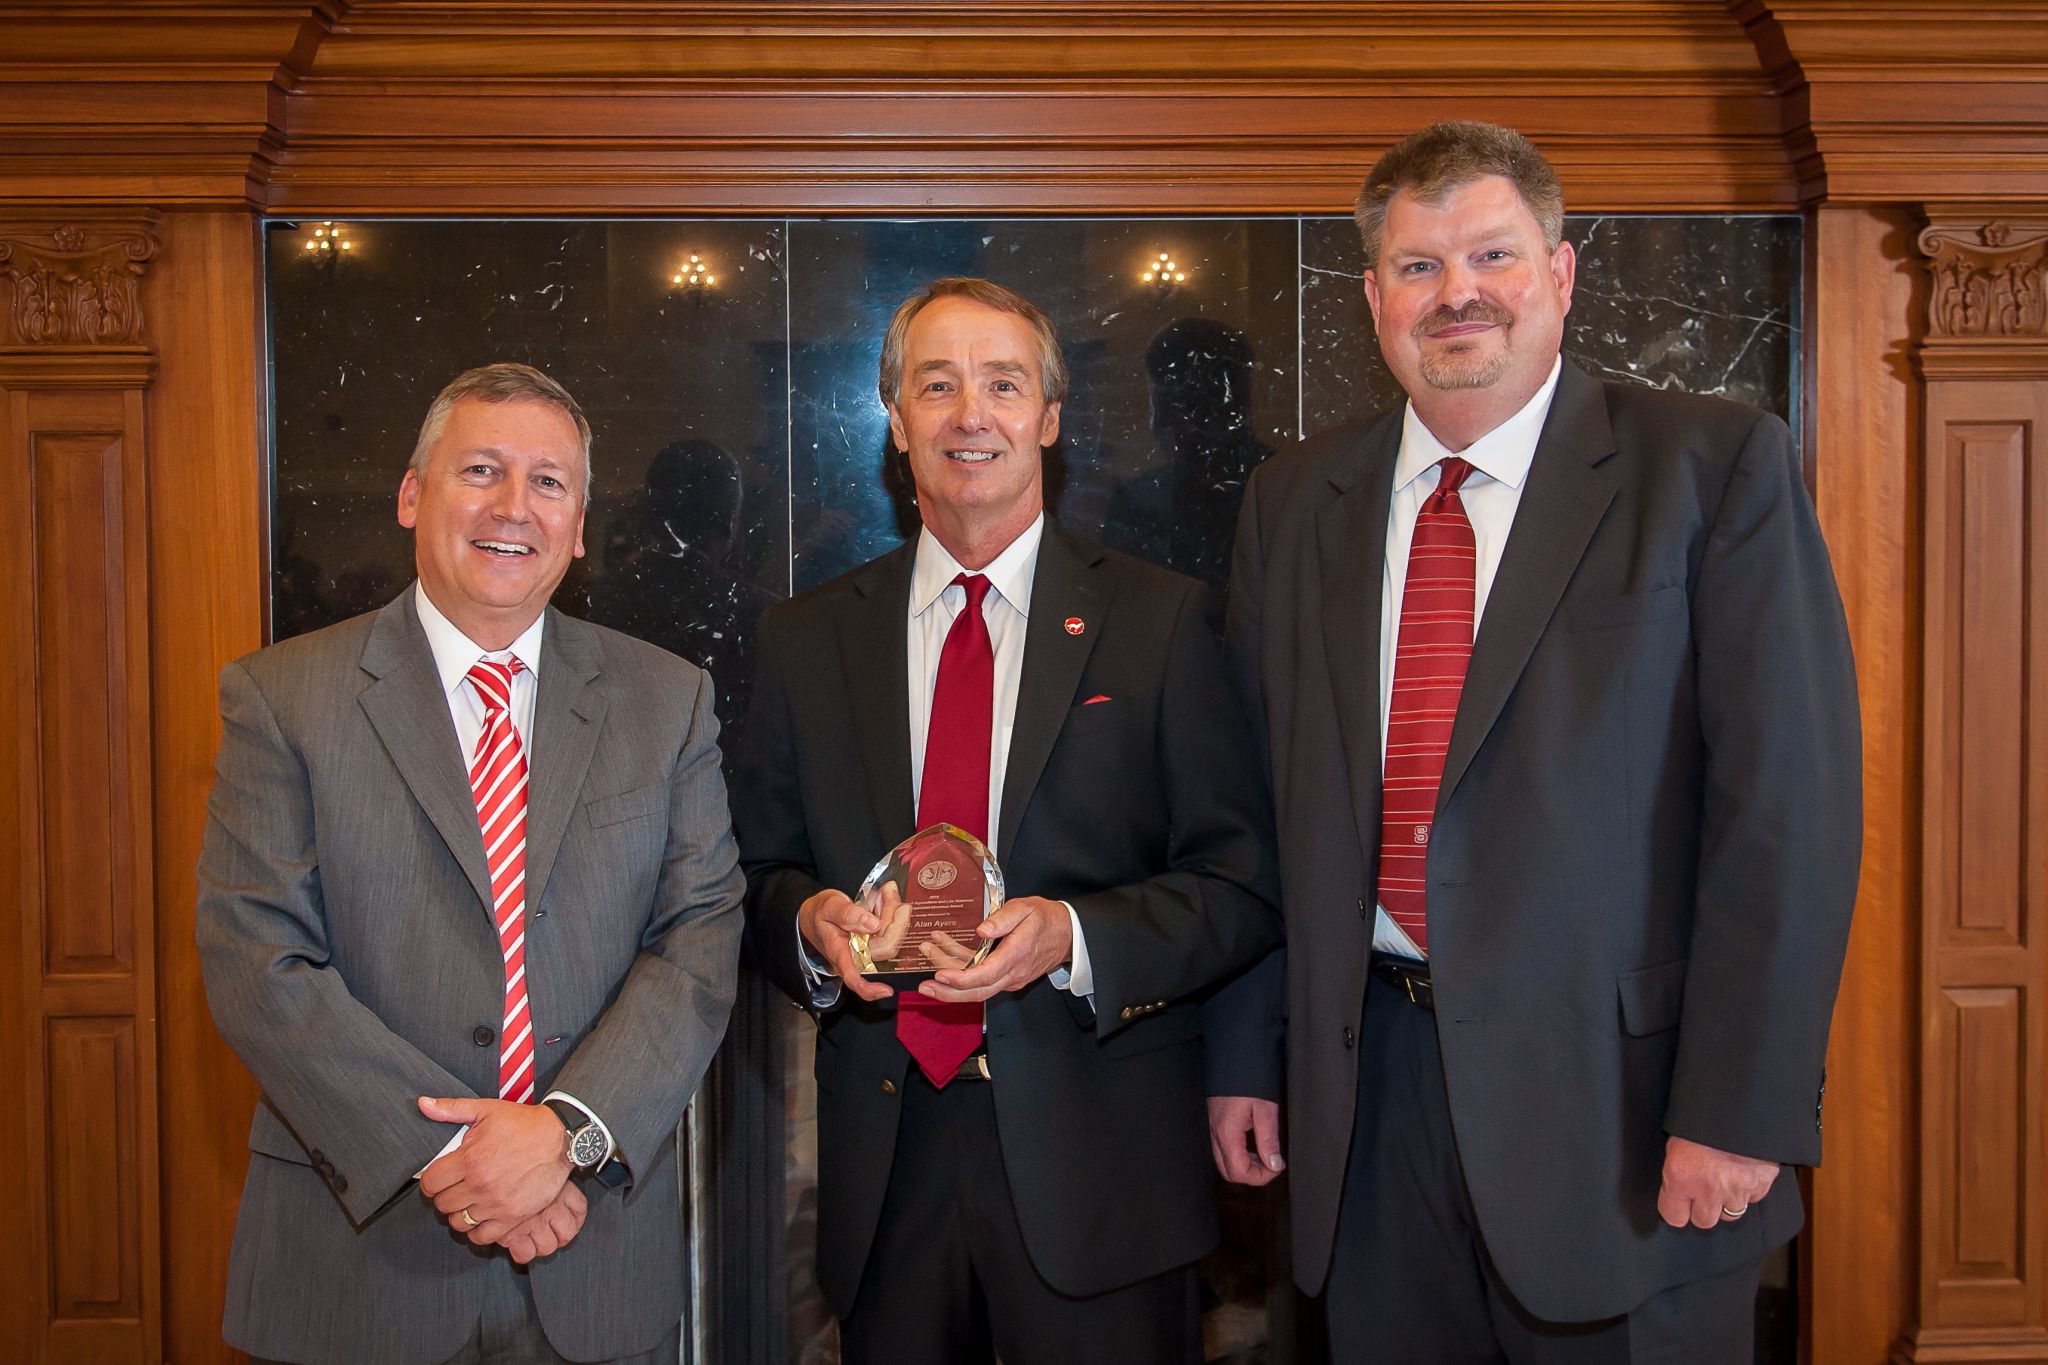 Three men standing in suits while the one in the middle is holding an award.